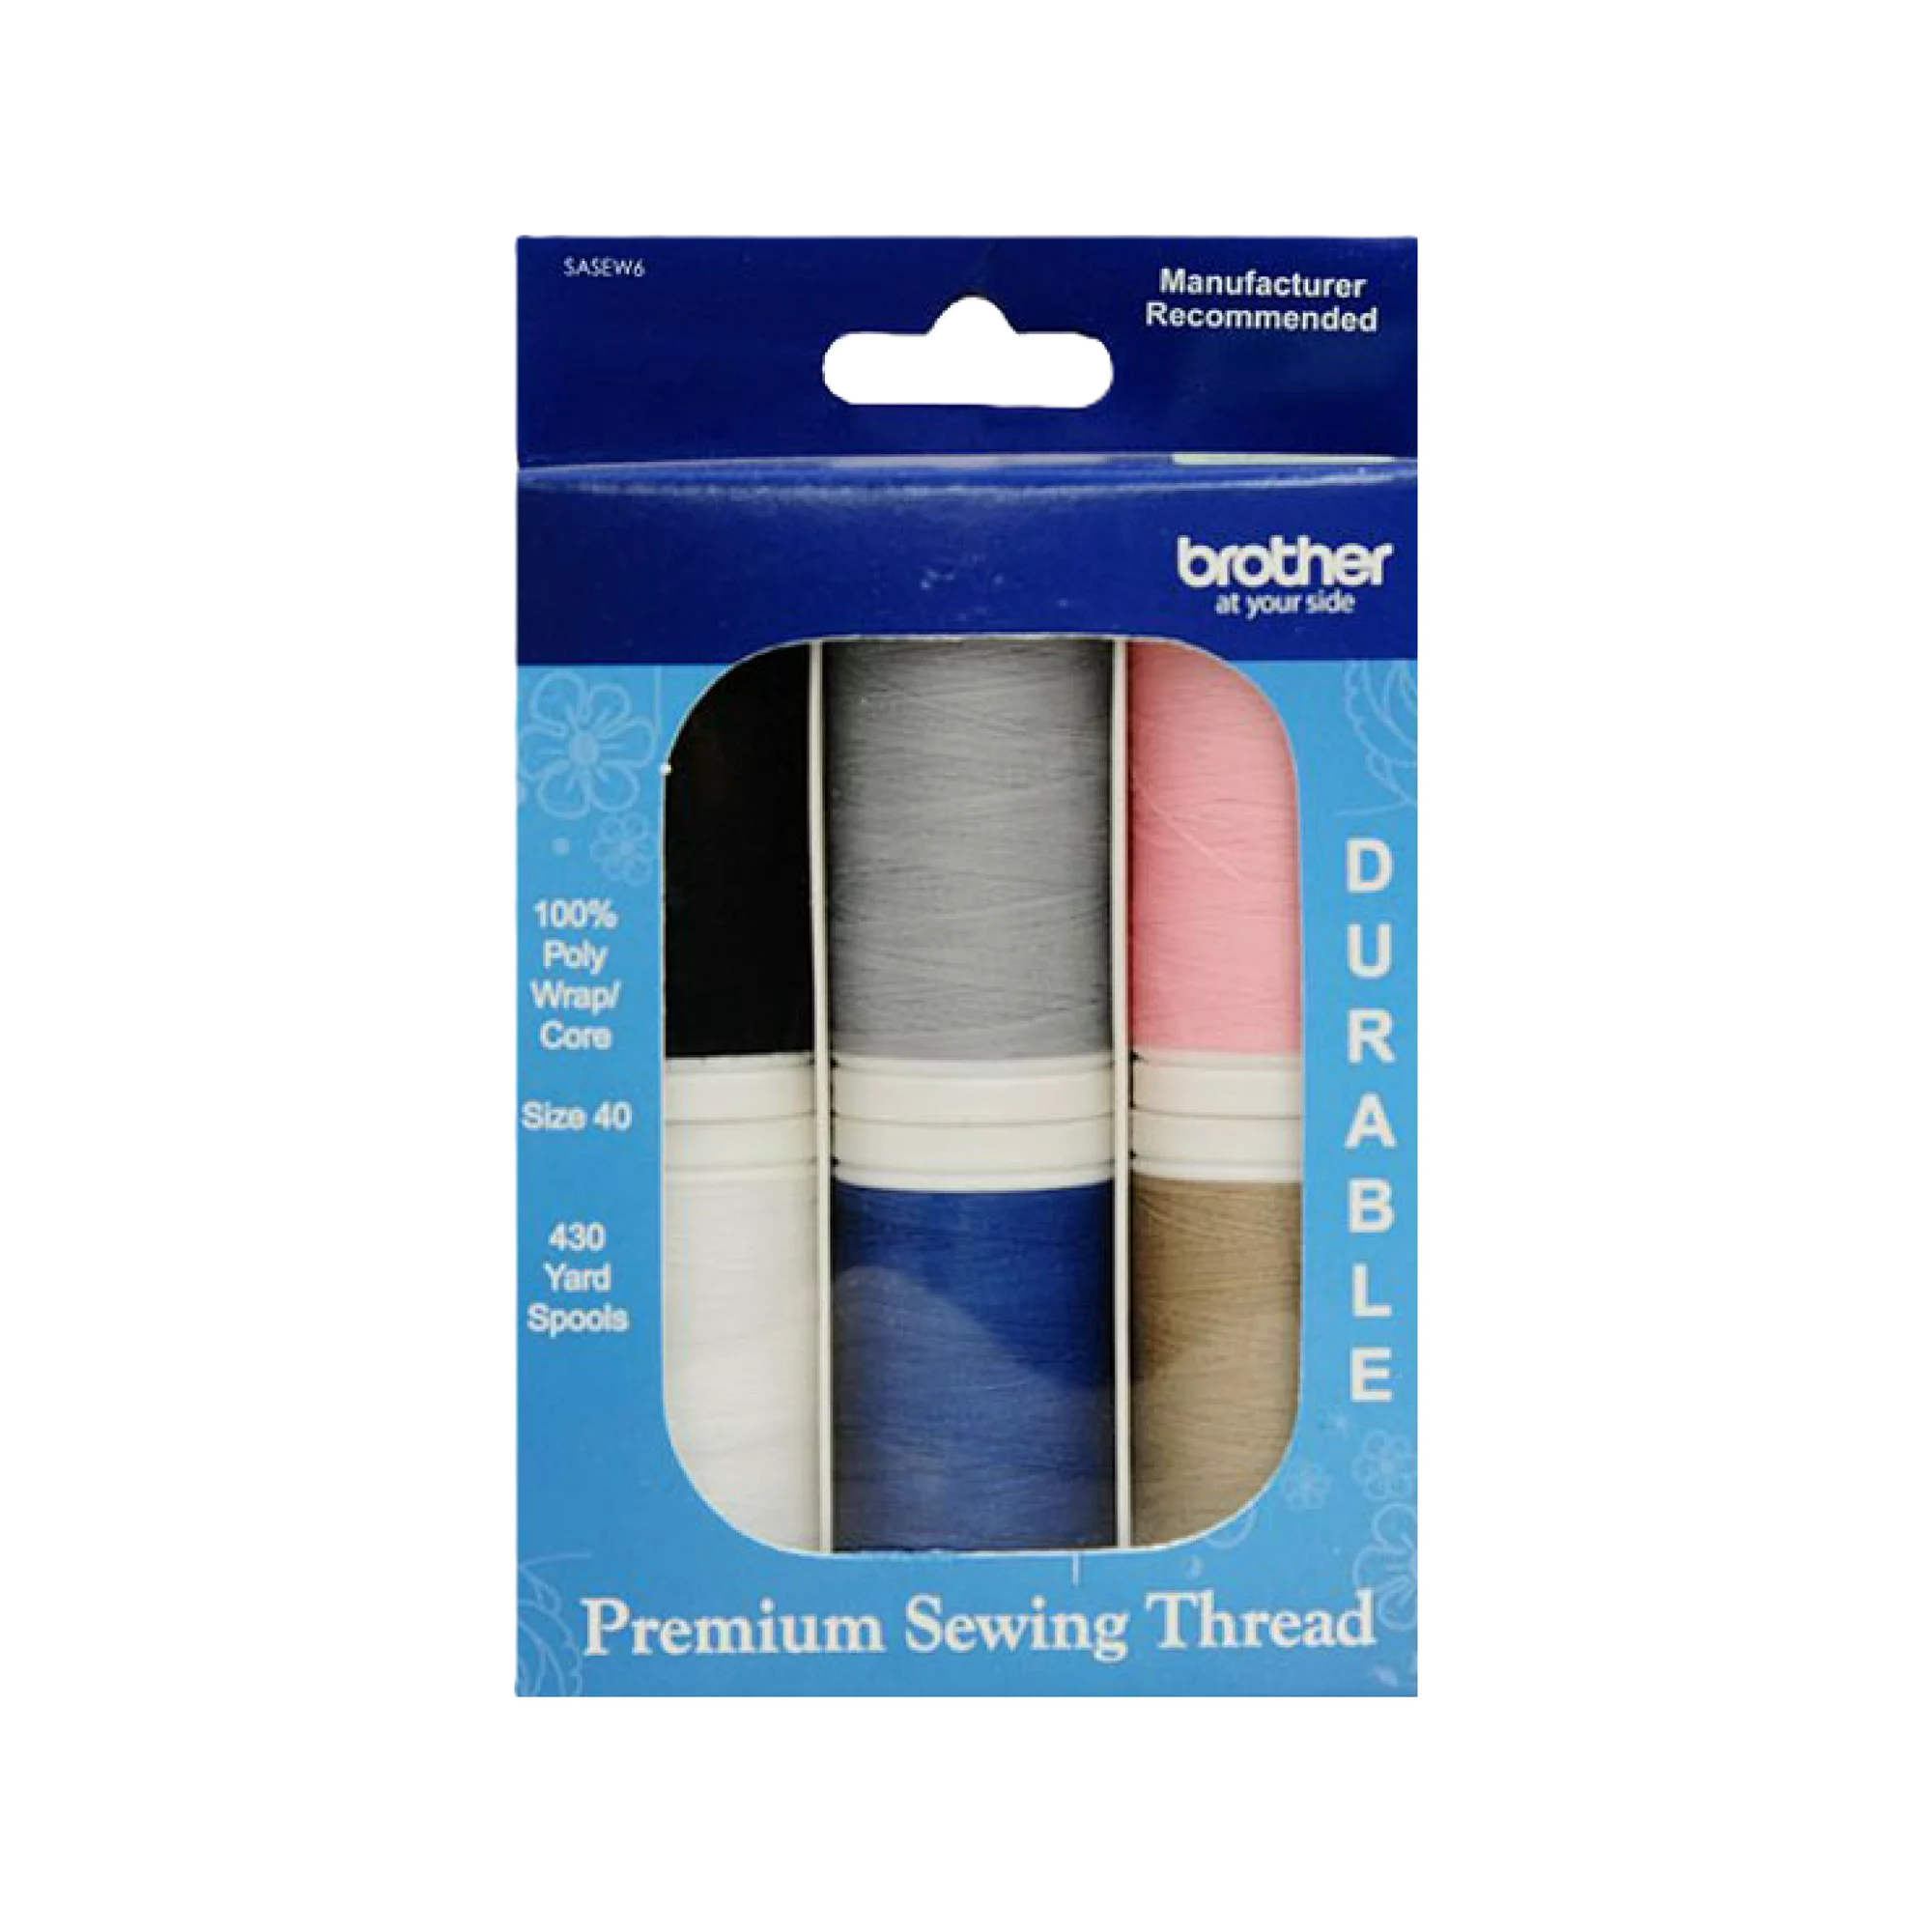 Brother 6pc Sewing Thread Kit SASEW6